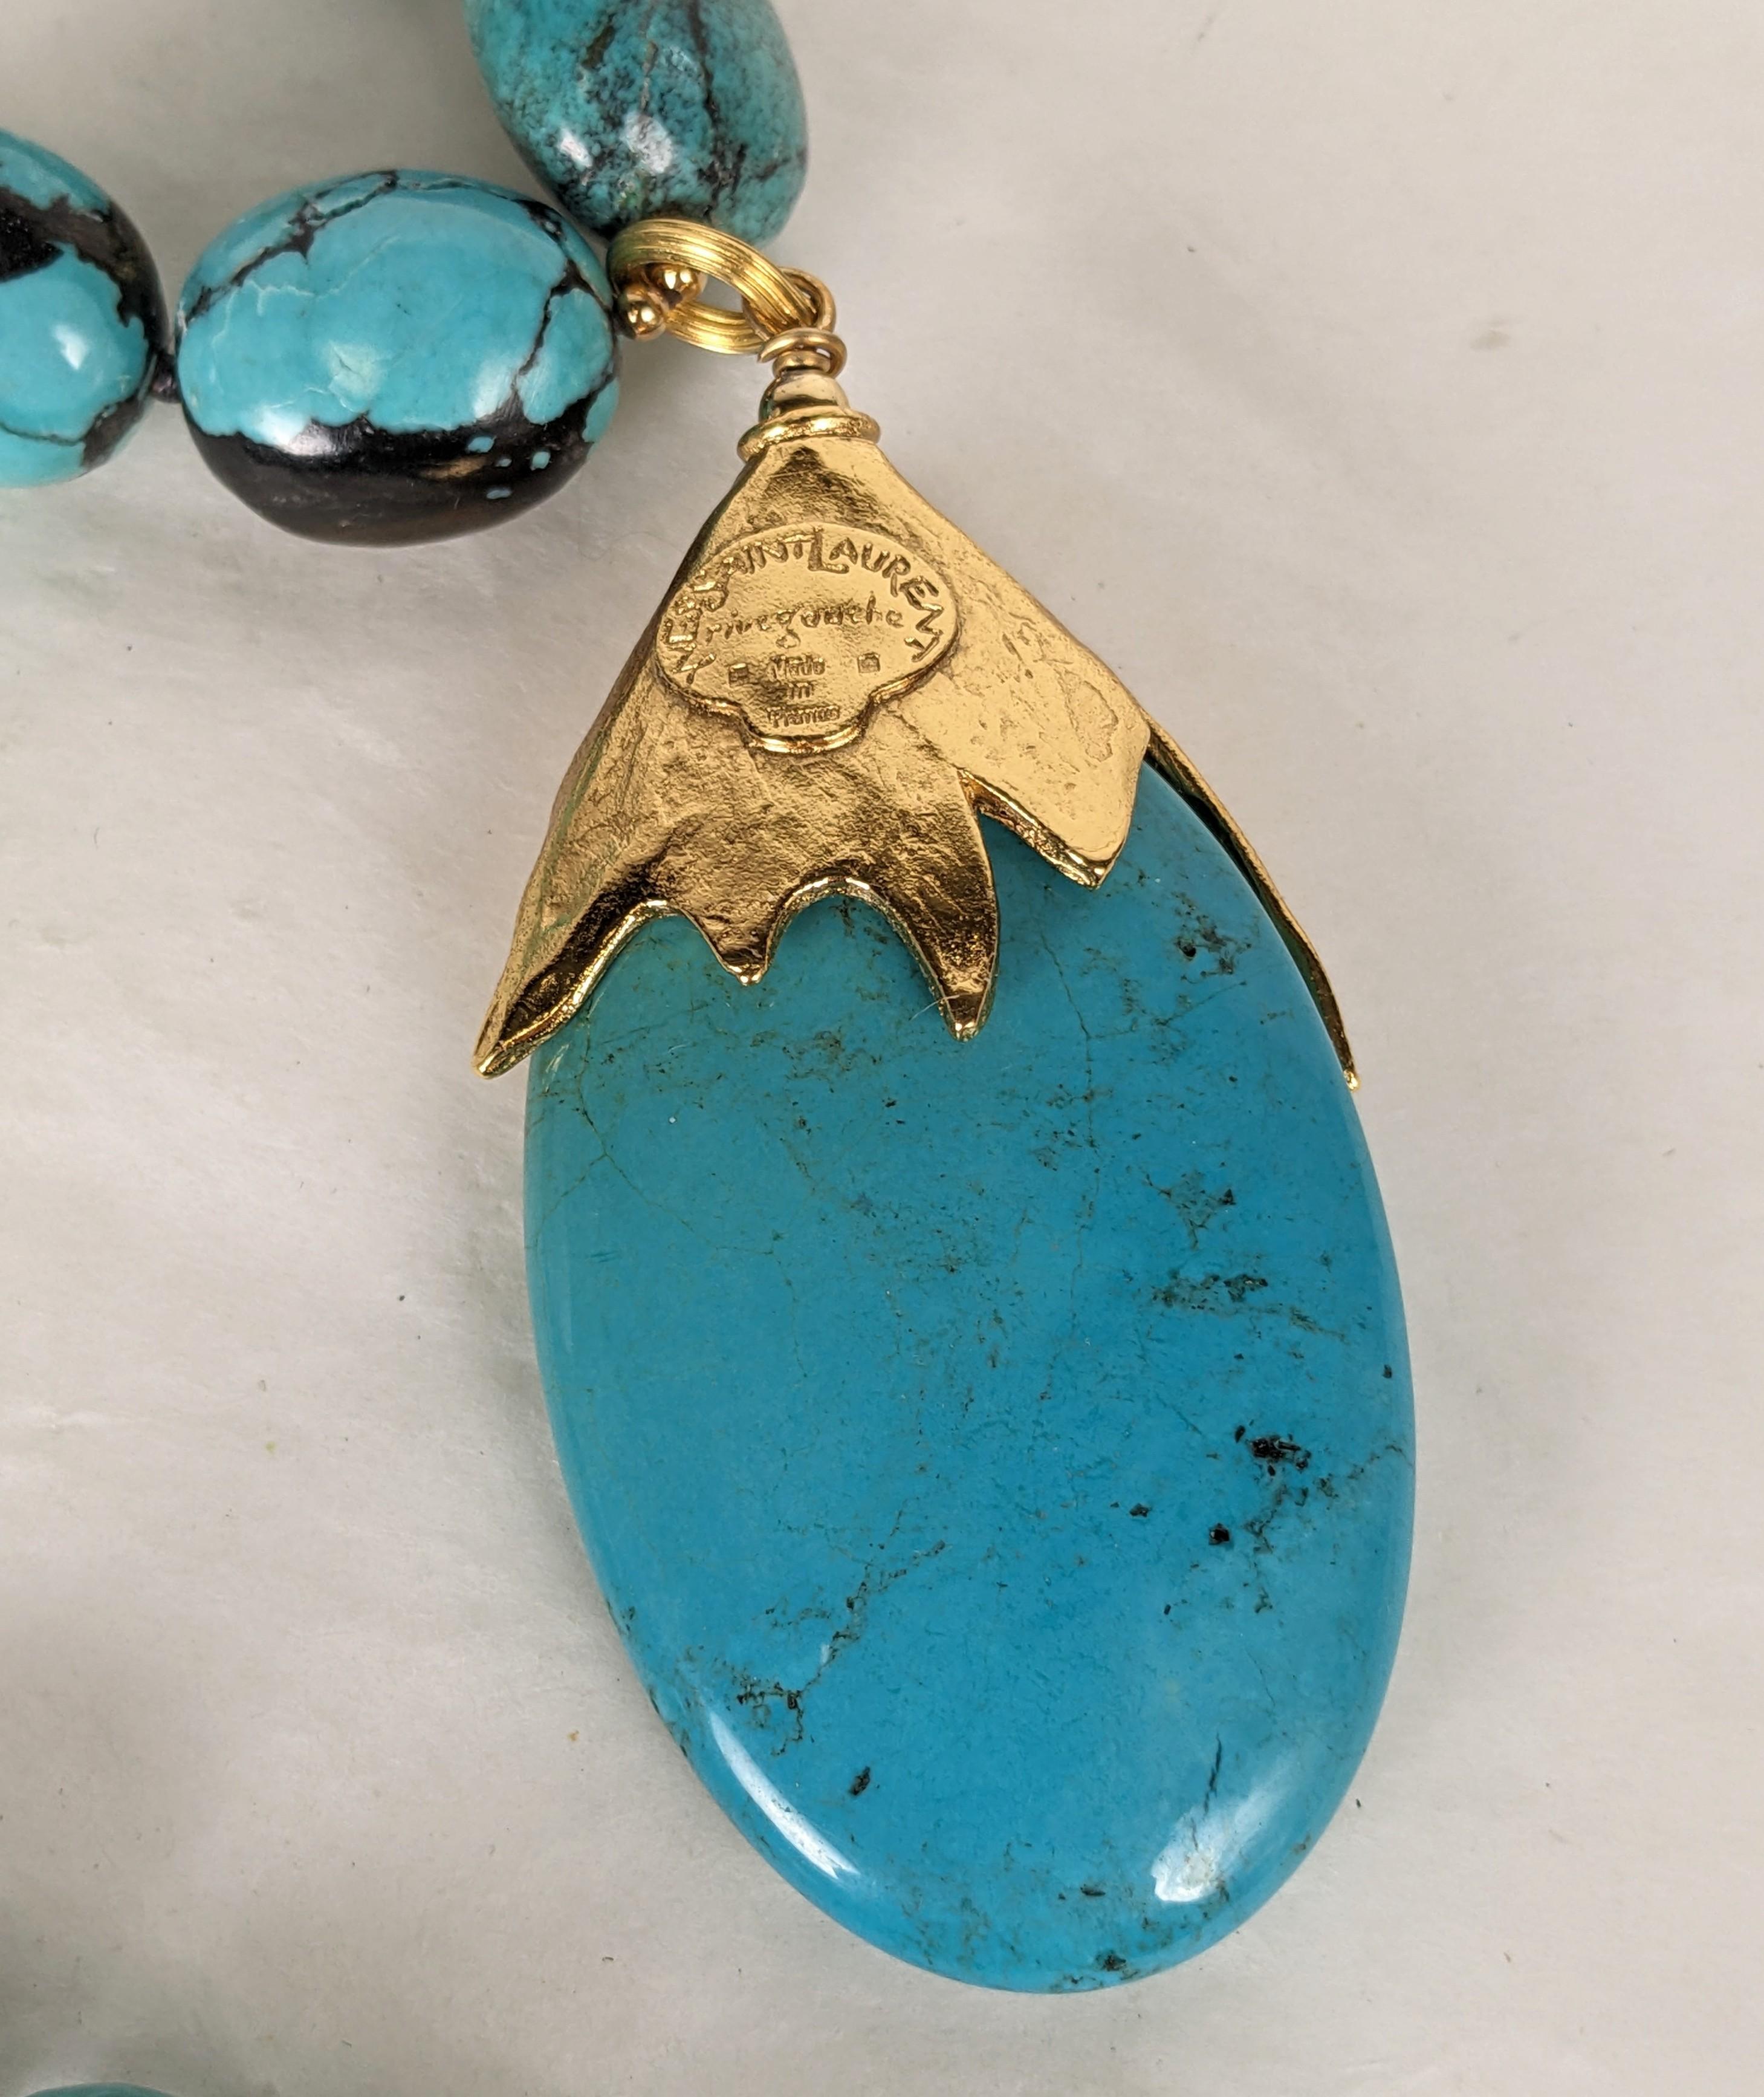 Yves Saint Laurent Rive Gauche Turquoise Matrix Pendant, Goossens In Excellent Condition For Sale In New York, NY